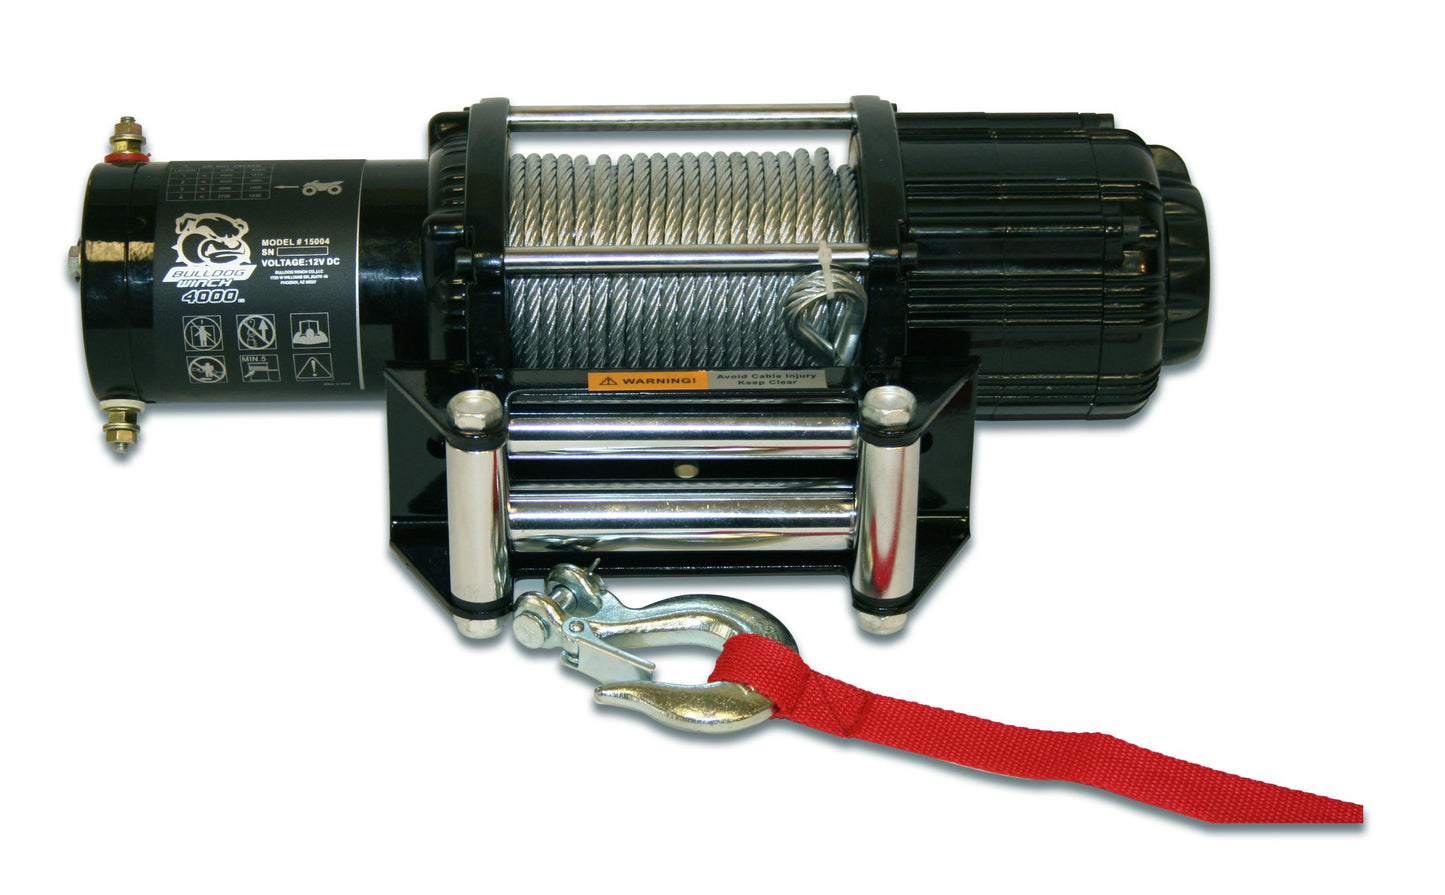 Bulldog Winch 4,000 LB UTV Winch 55 Ft Wire Rope Two Switches Mounting Channel Roller Fairlead